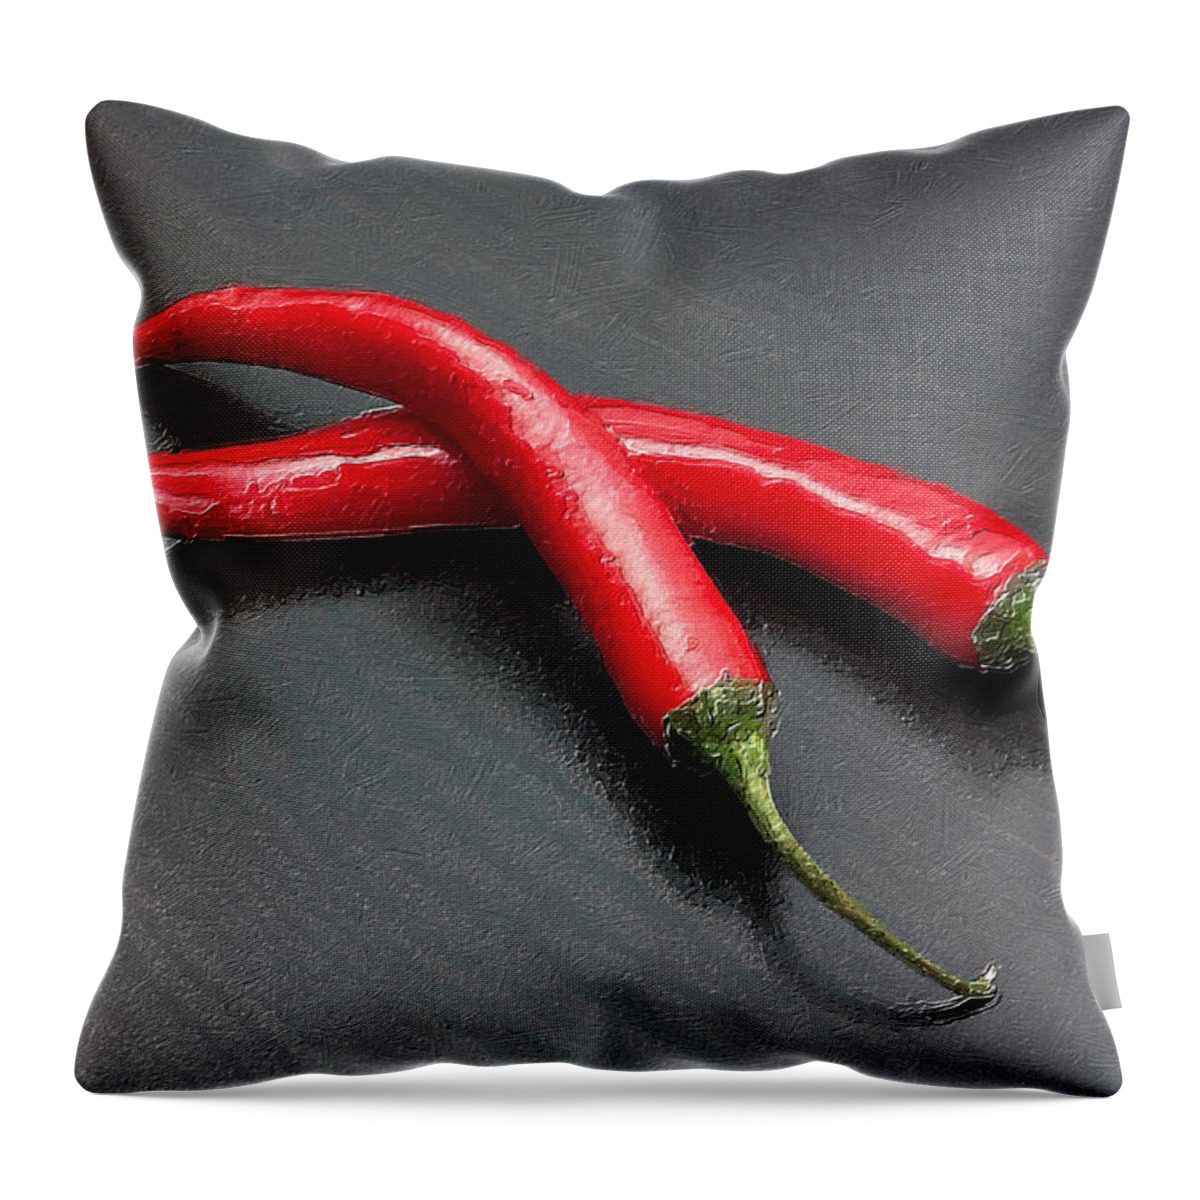 Spices Throw Pillow featuring the painting Mild Medium Hot Fire Breathing Red Chili Peppers by Tony Rubino